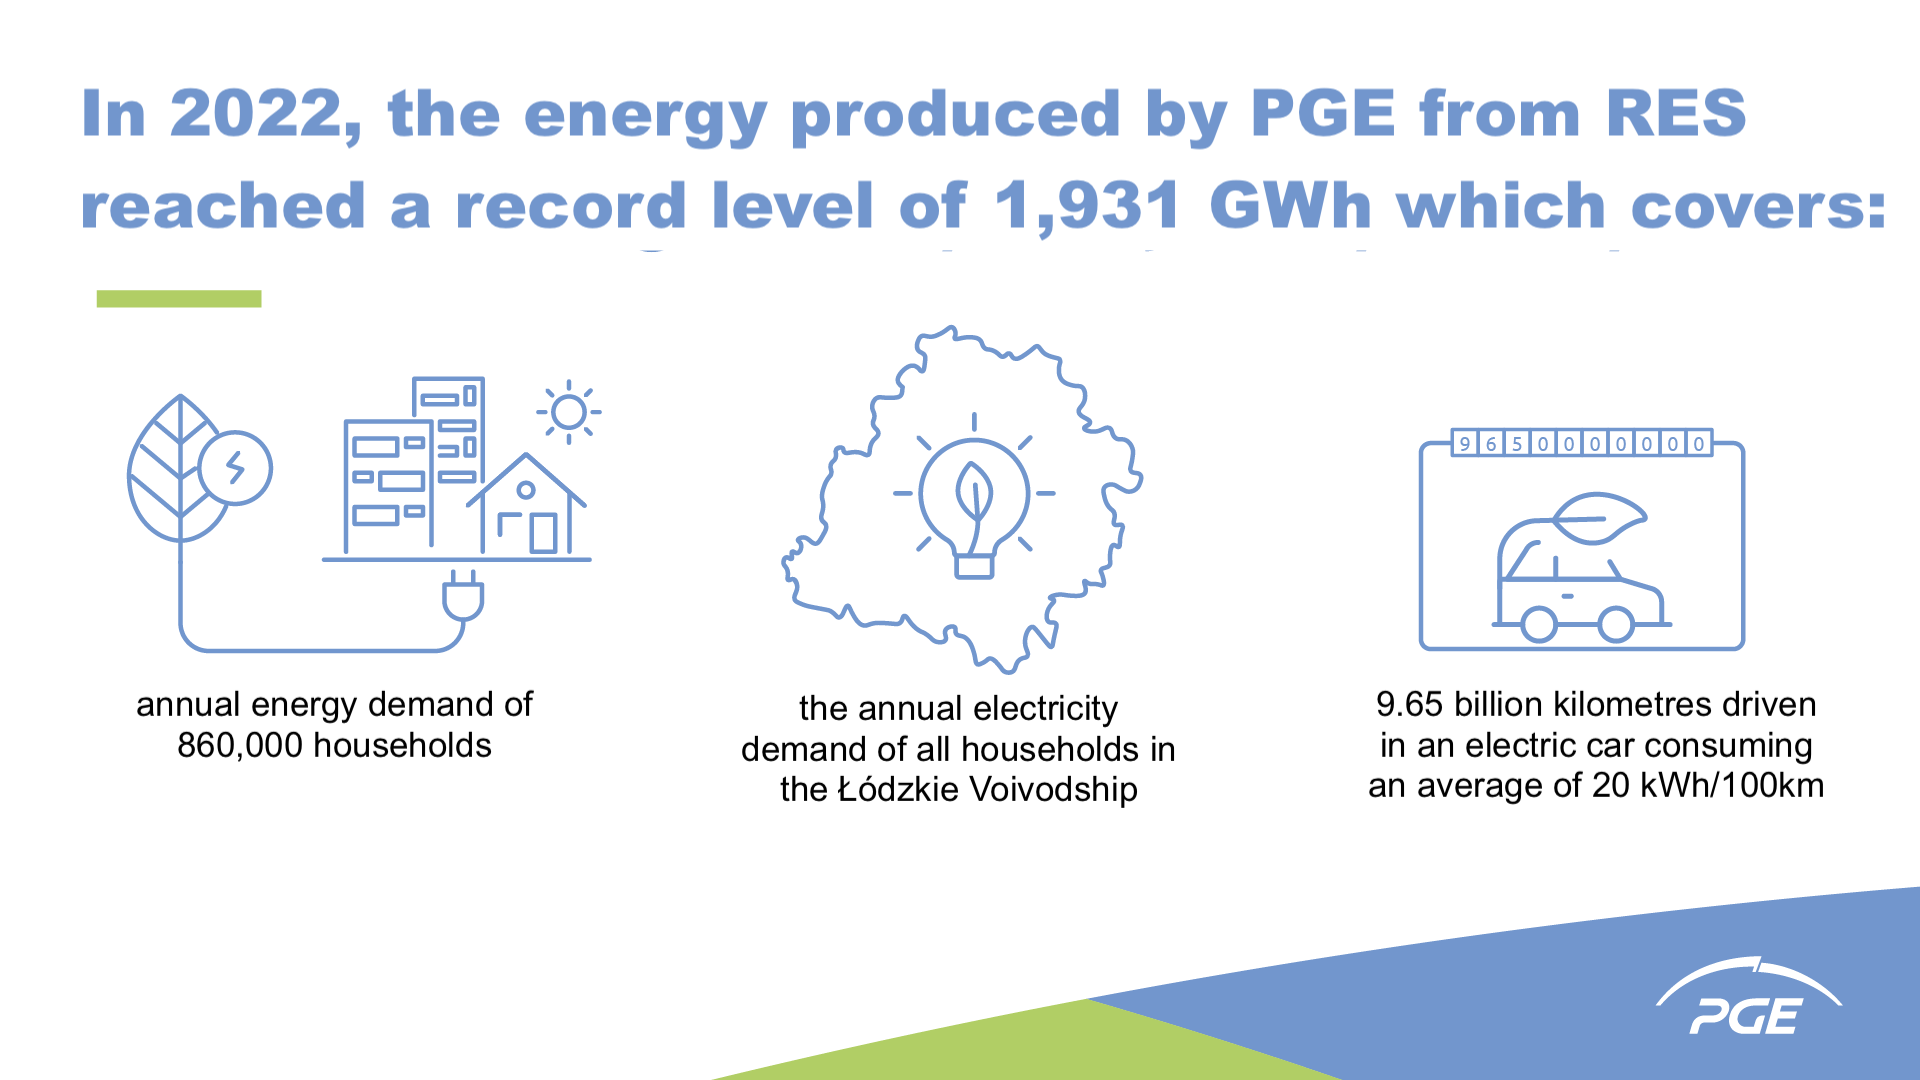 In 2022, the energy produced by PGE from RES reached a record level of 1,931 GWh.